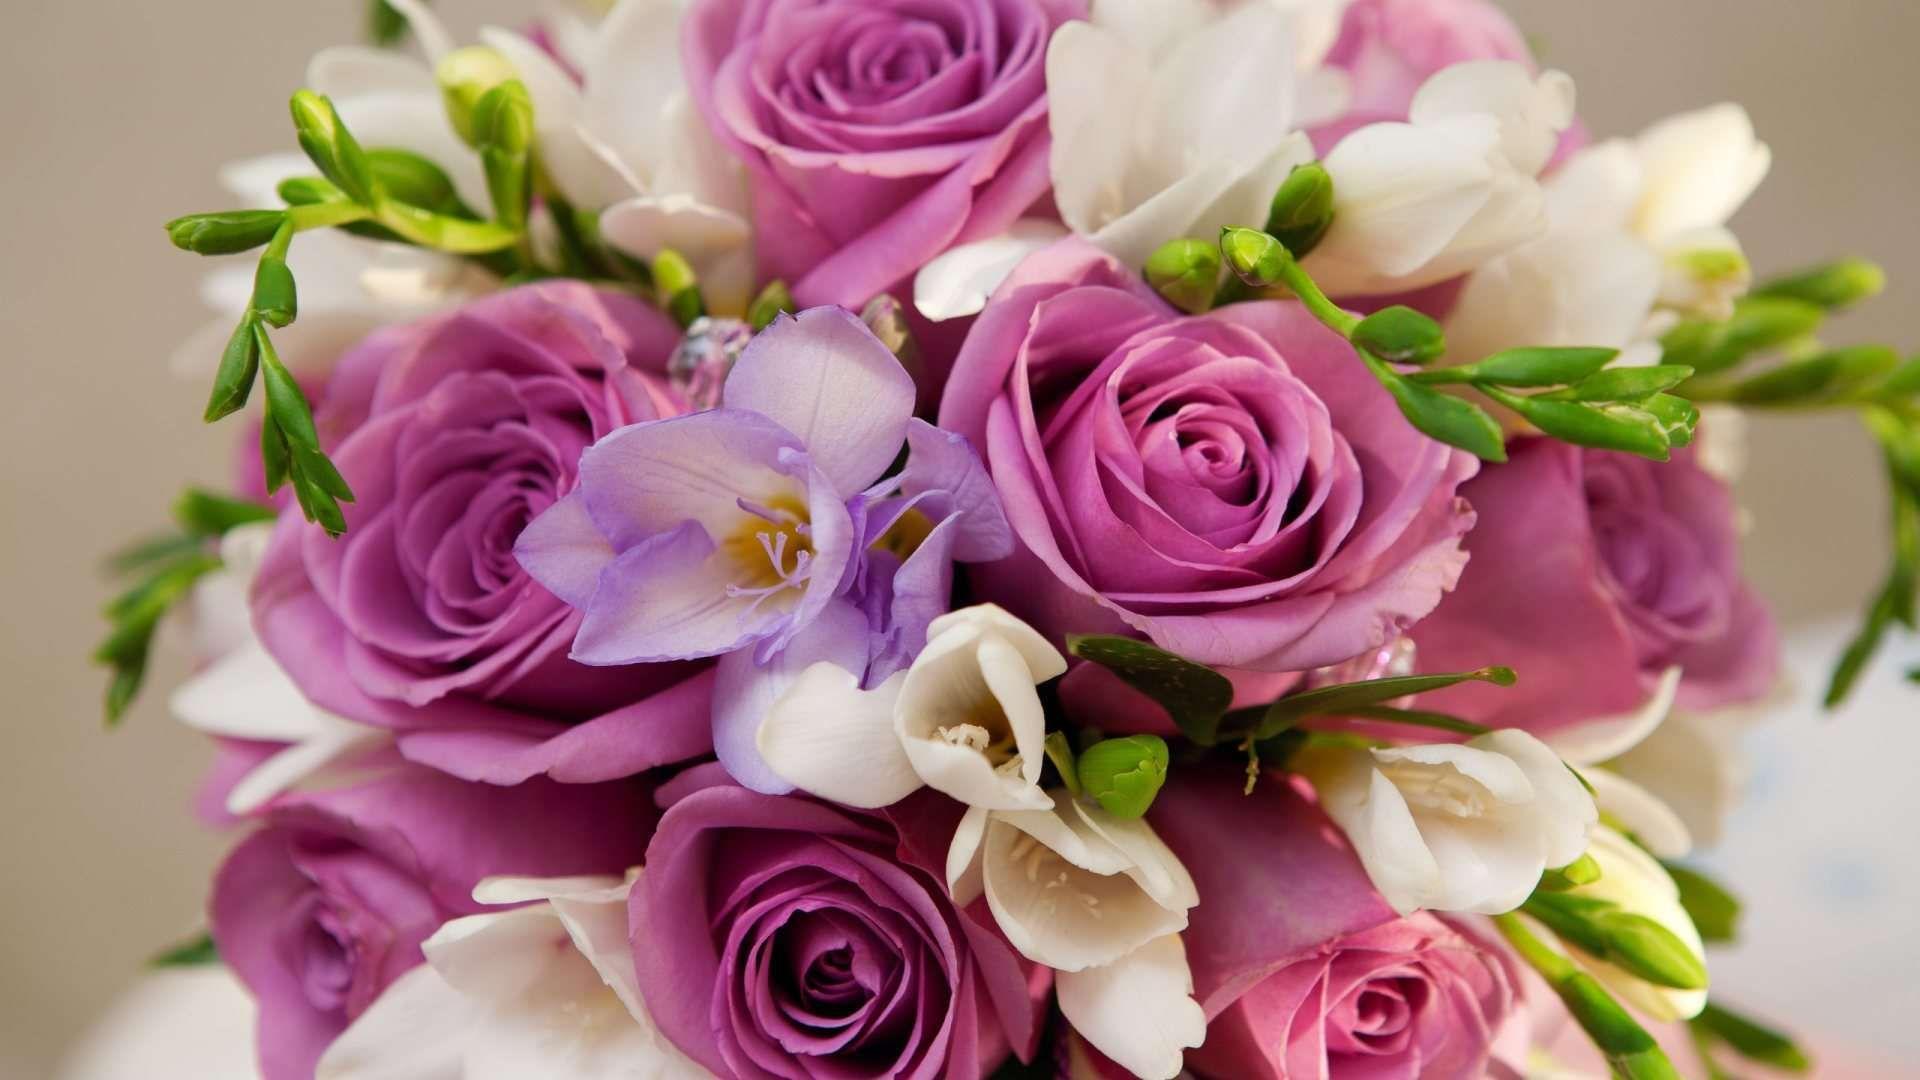 Beautiful Purple and White Flowers Bouquet 1080p HD Wallpaper